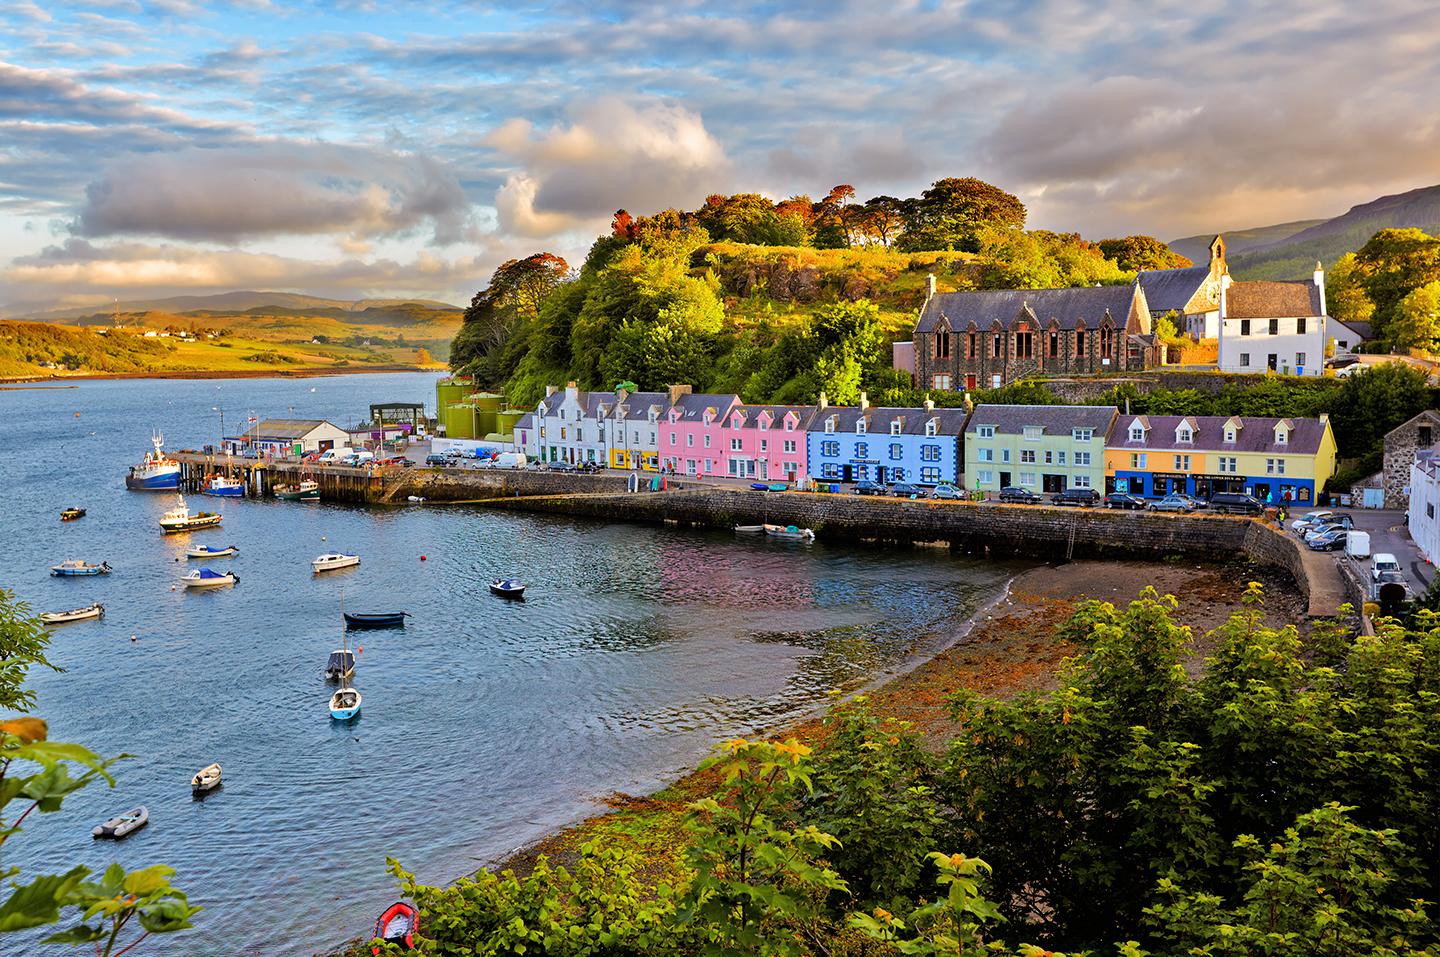 Experience all the charm and culture with Scotland tours & excursions